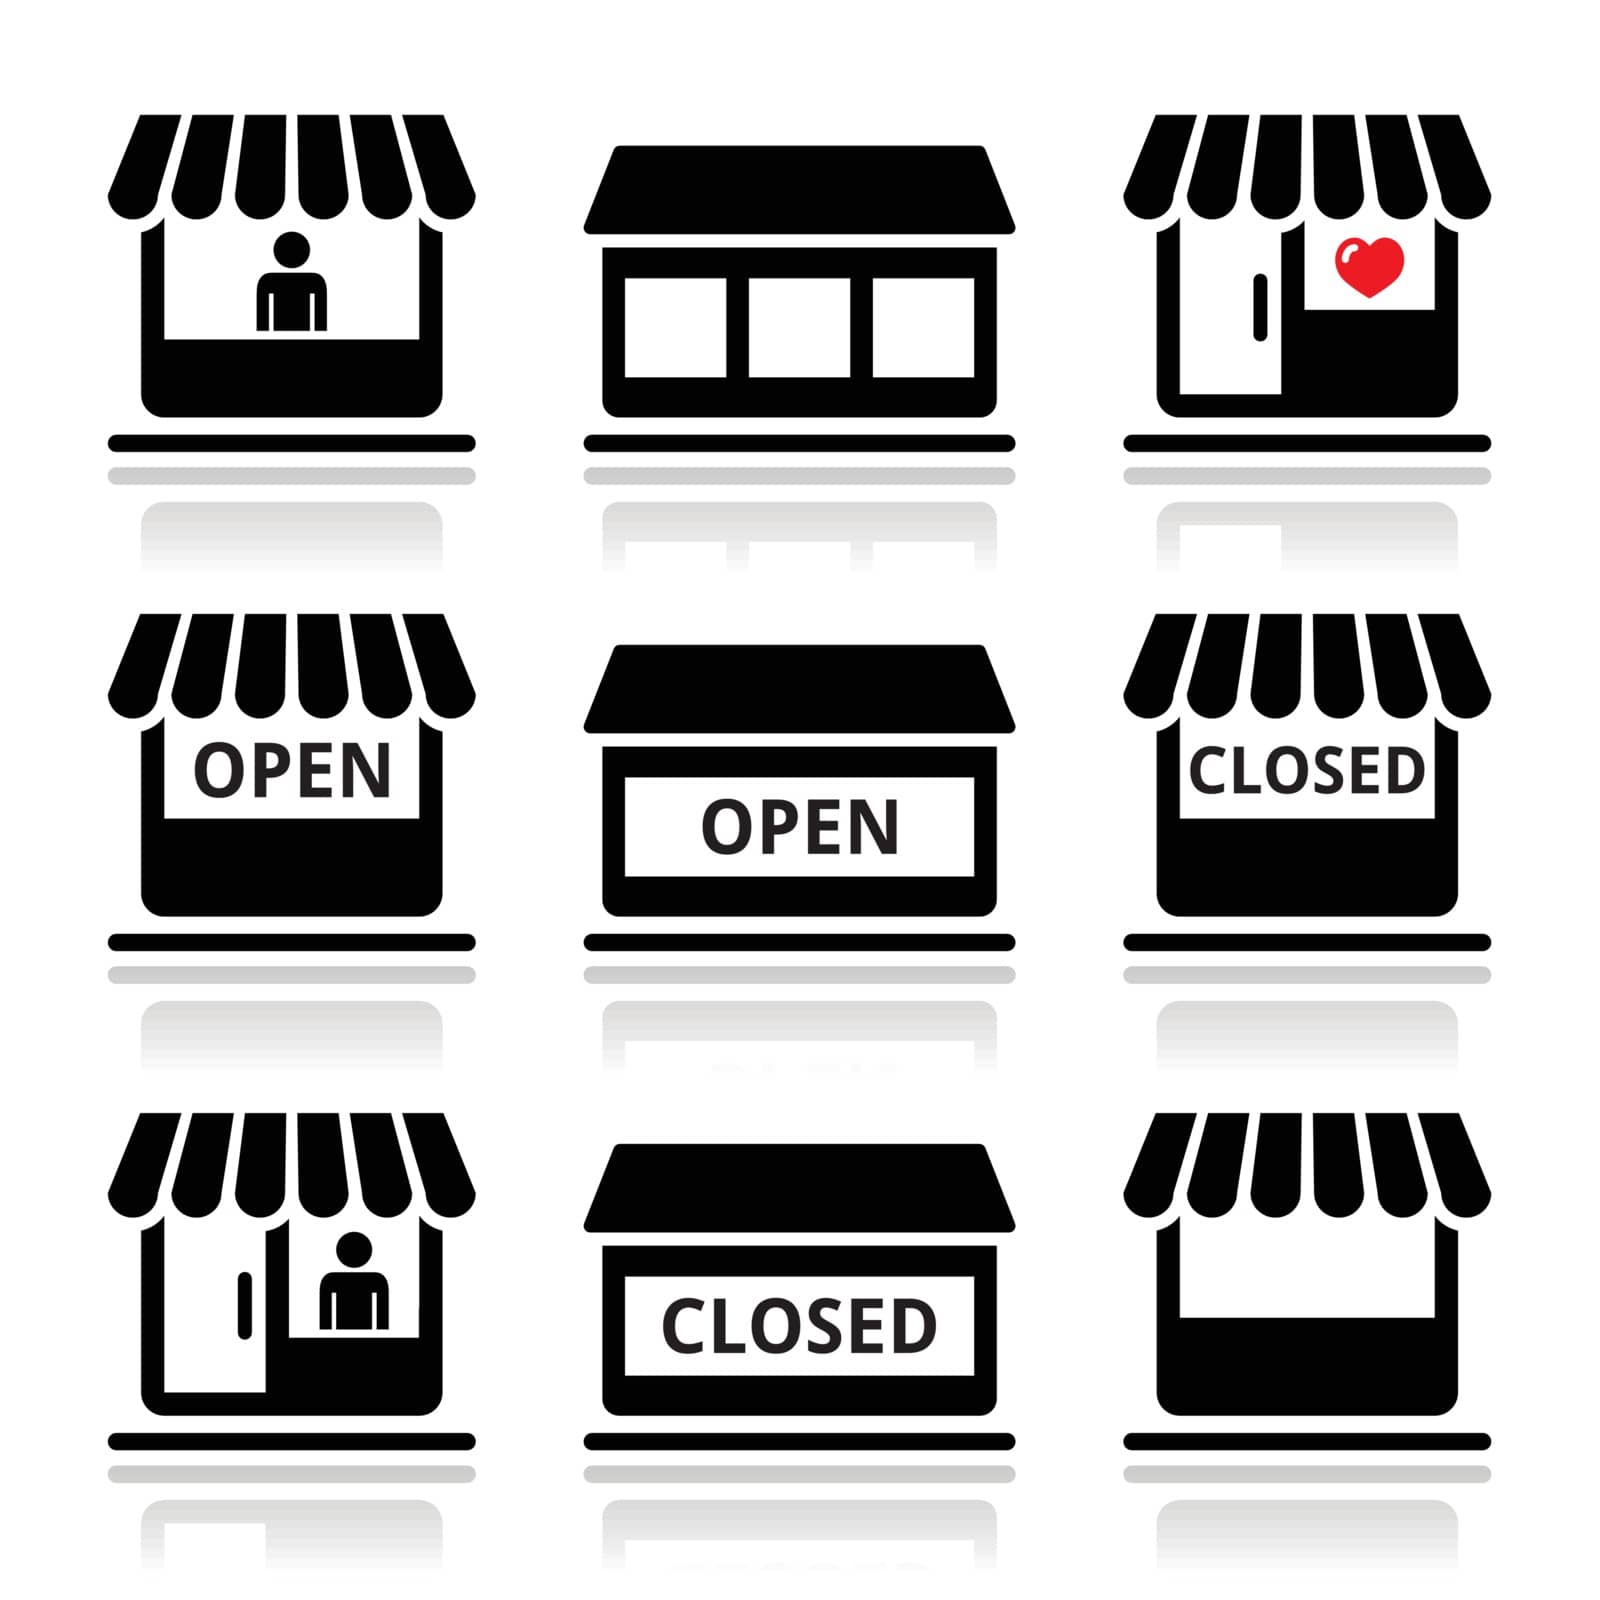 Retail, shopping, buying online icons set isolated on white - open, closed